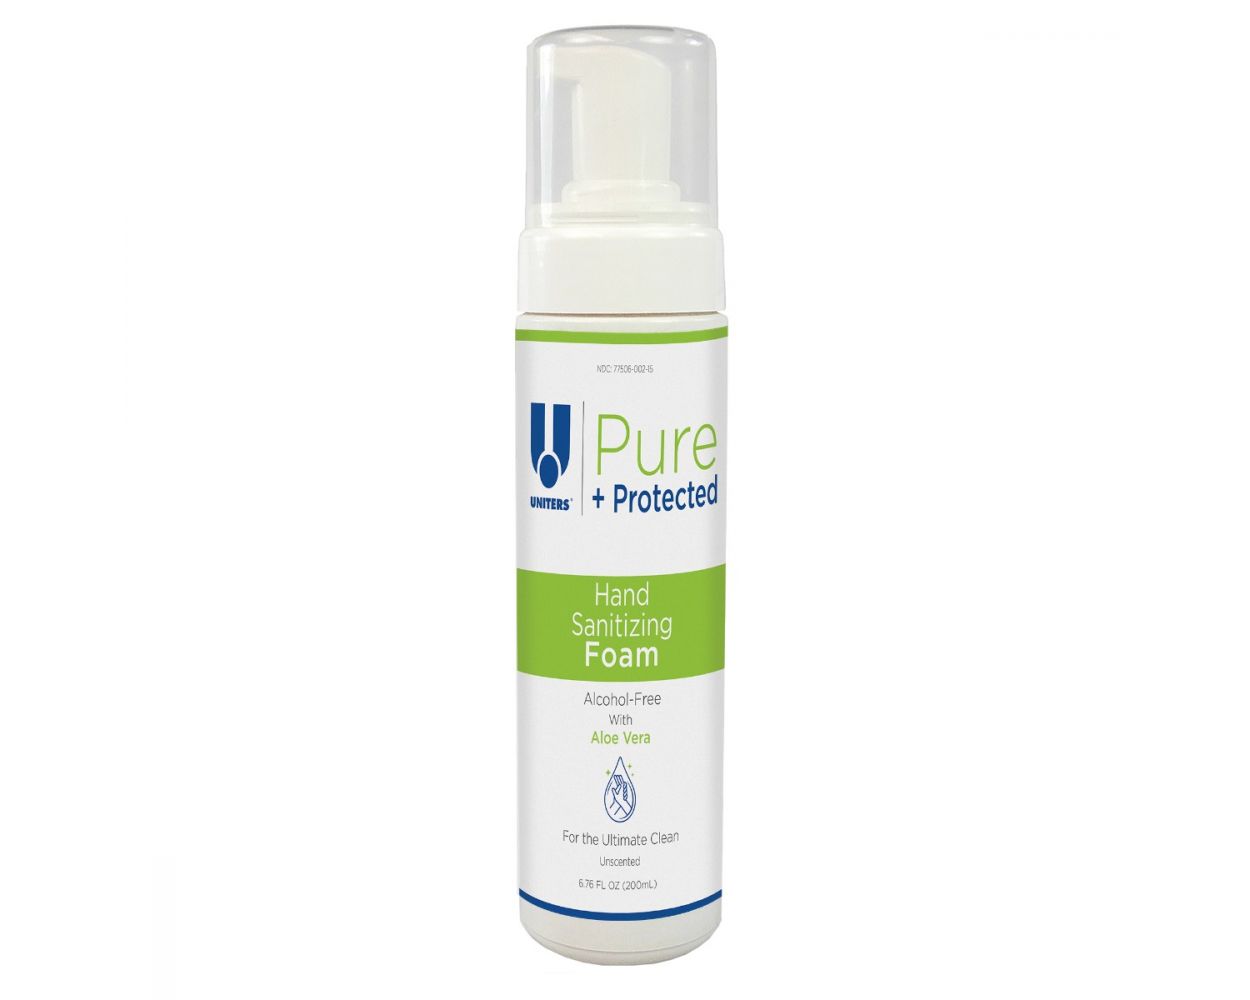 UNITERS Pure + Protected Hand Sanitizer Foam (3 Pack) - 200 ml